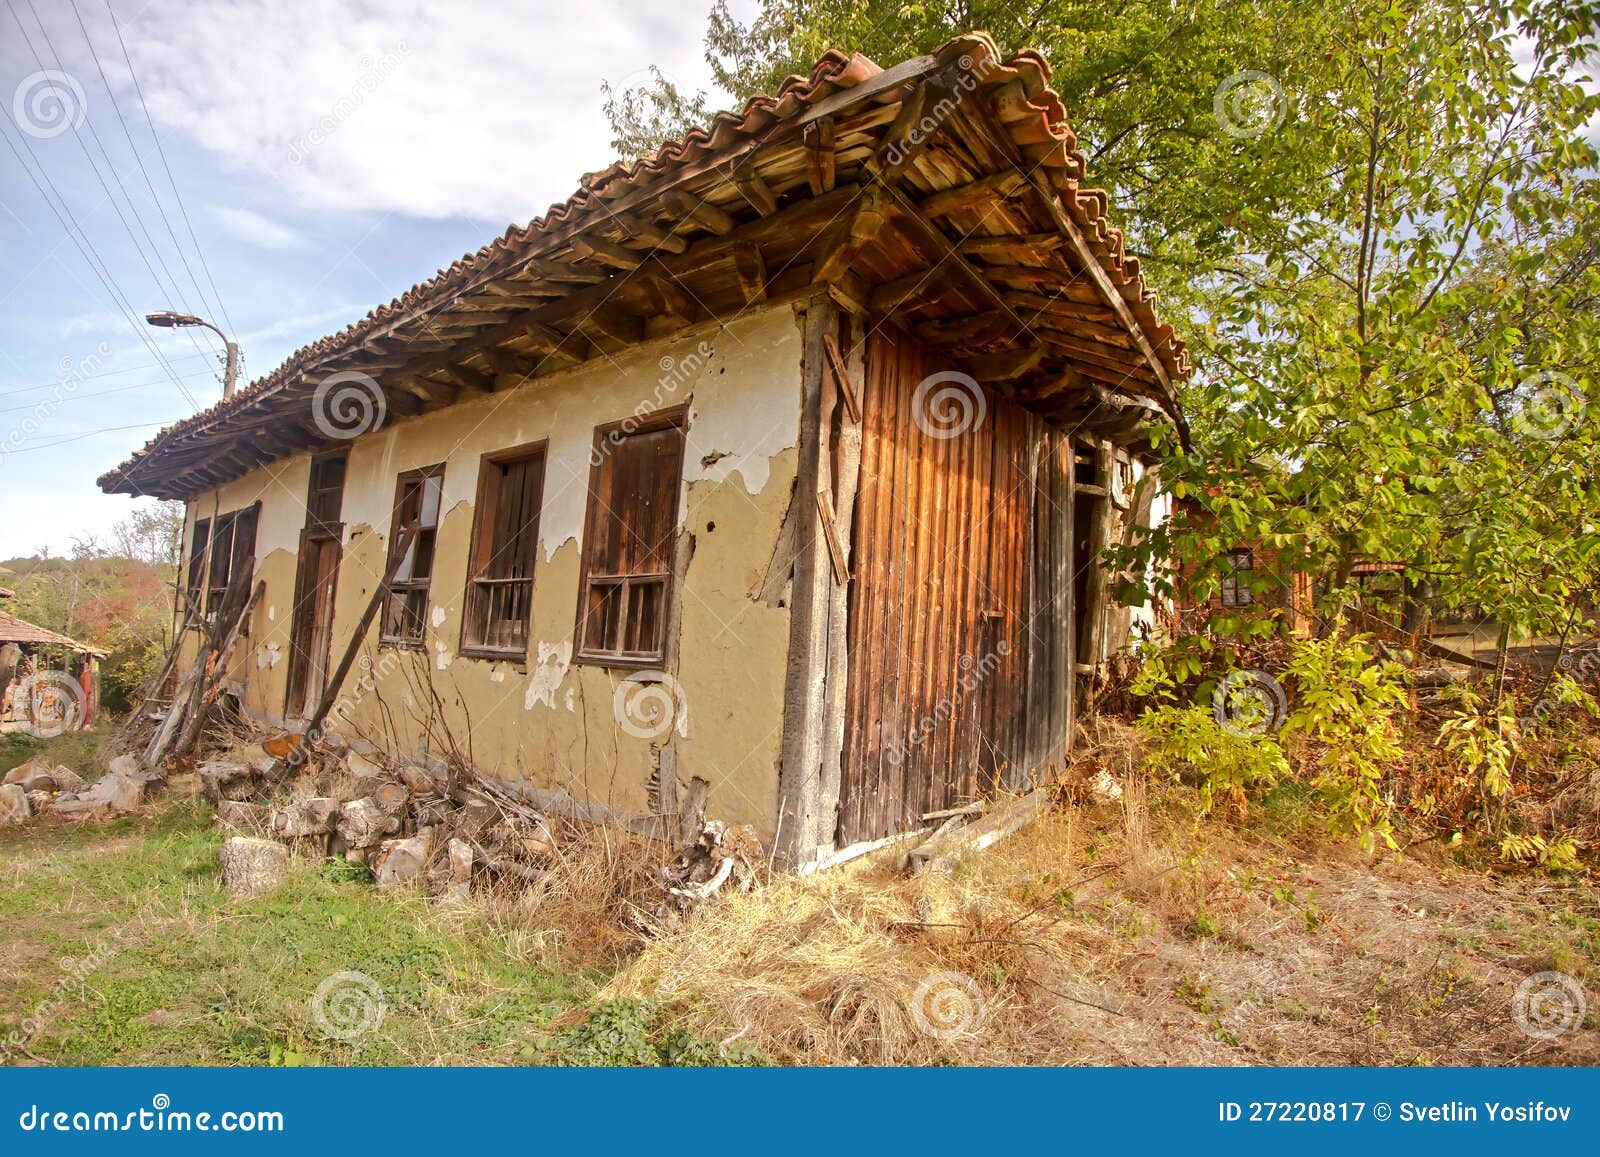 Old mountain house. stock image. Image of wood, houses - 27220817